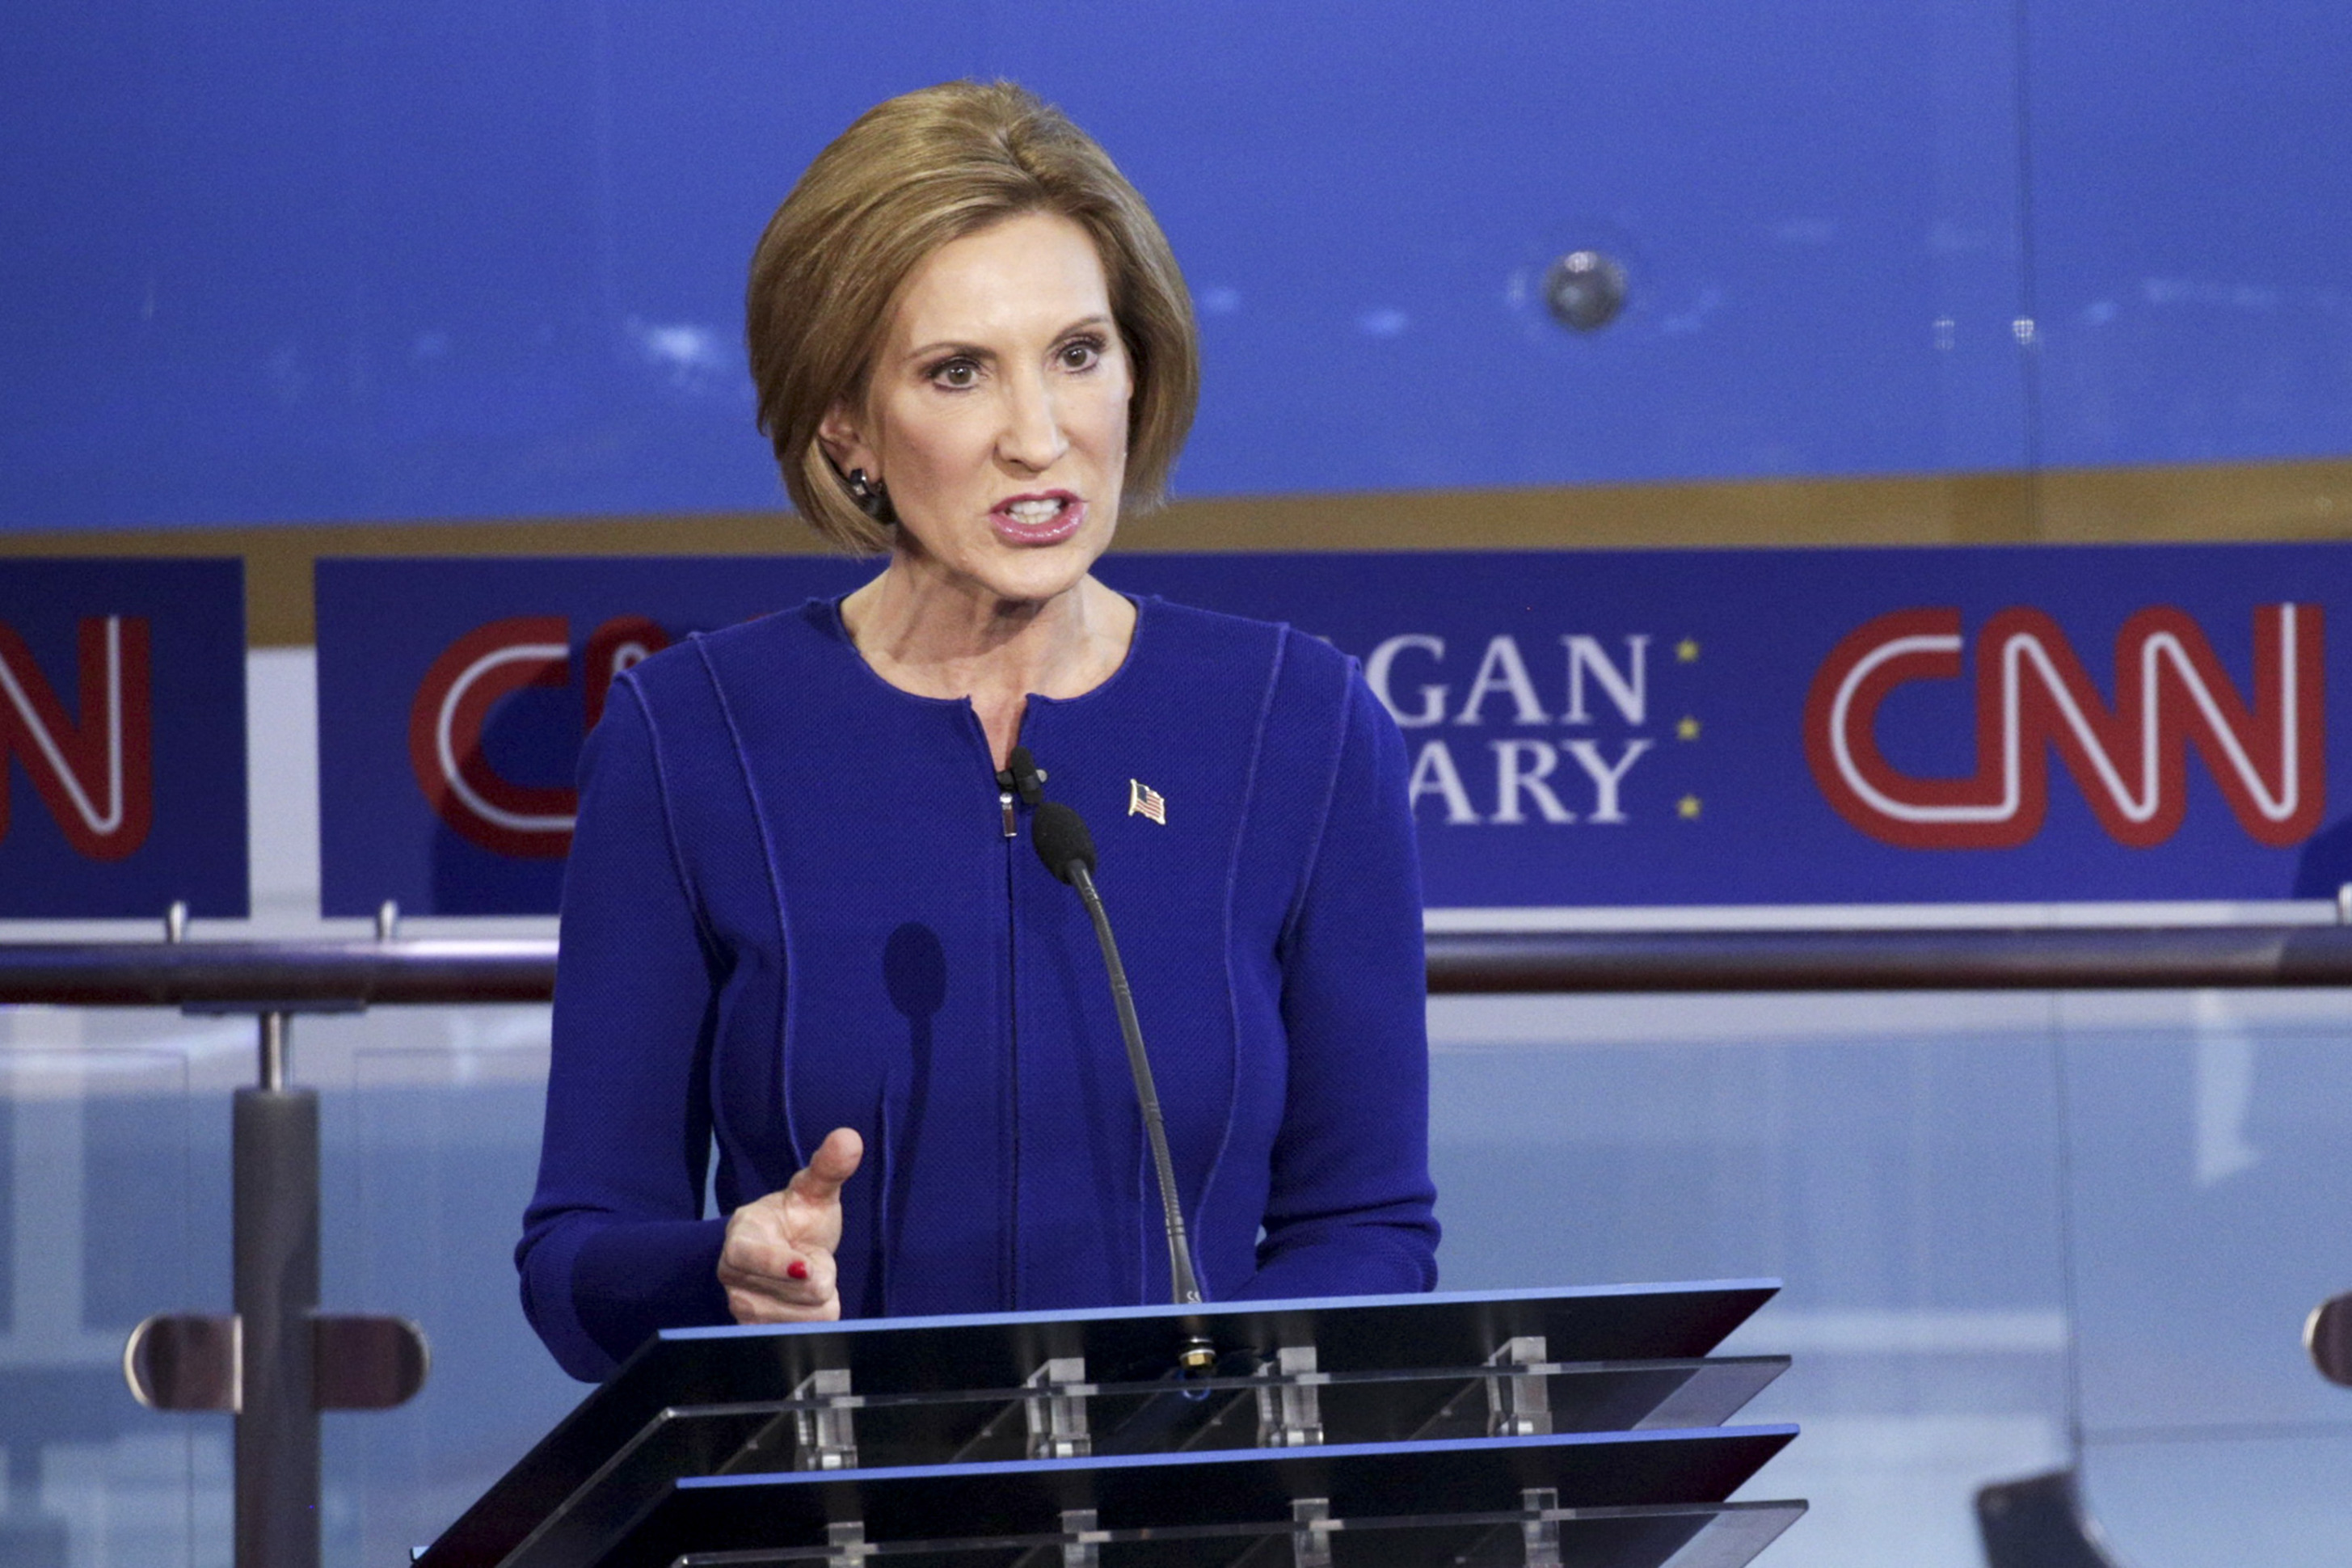 Carly Fiorina speaks during the debate at the Reagan presidential library on Sept. 16, 2015.
